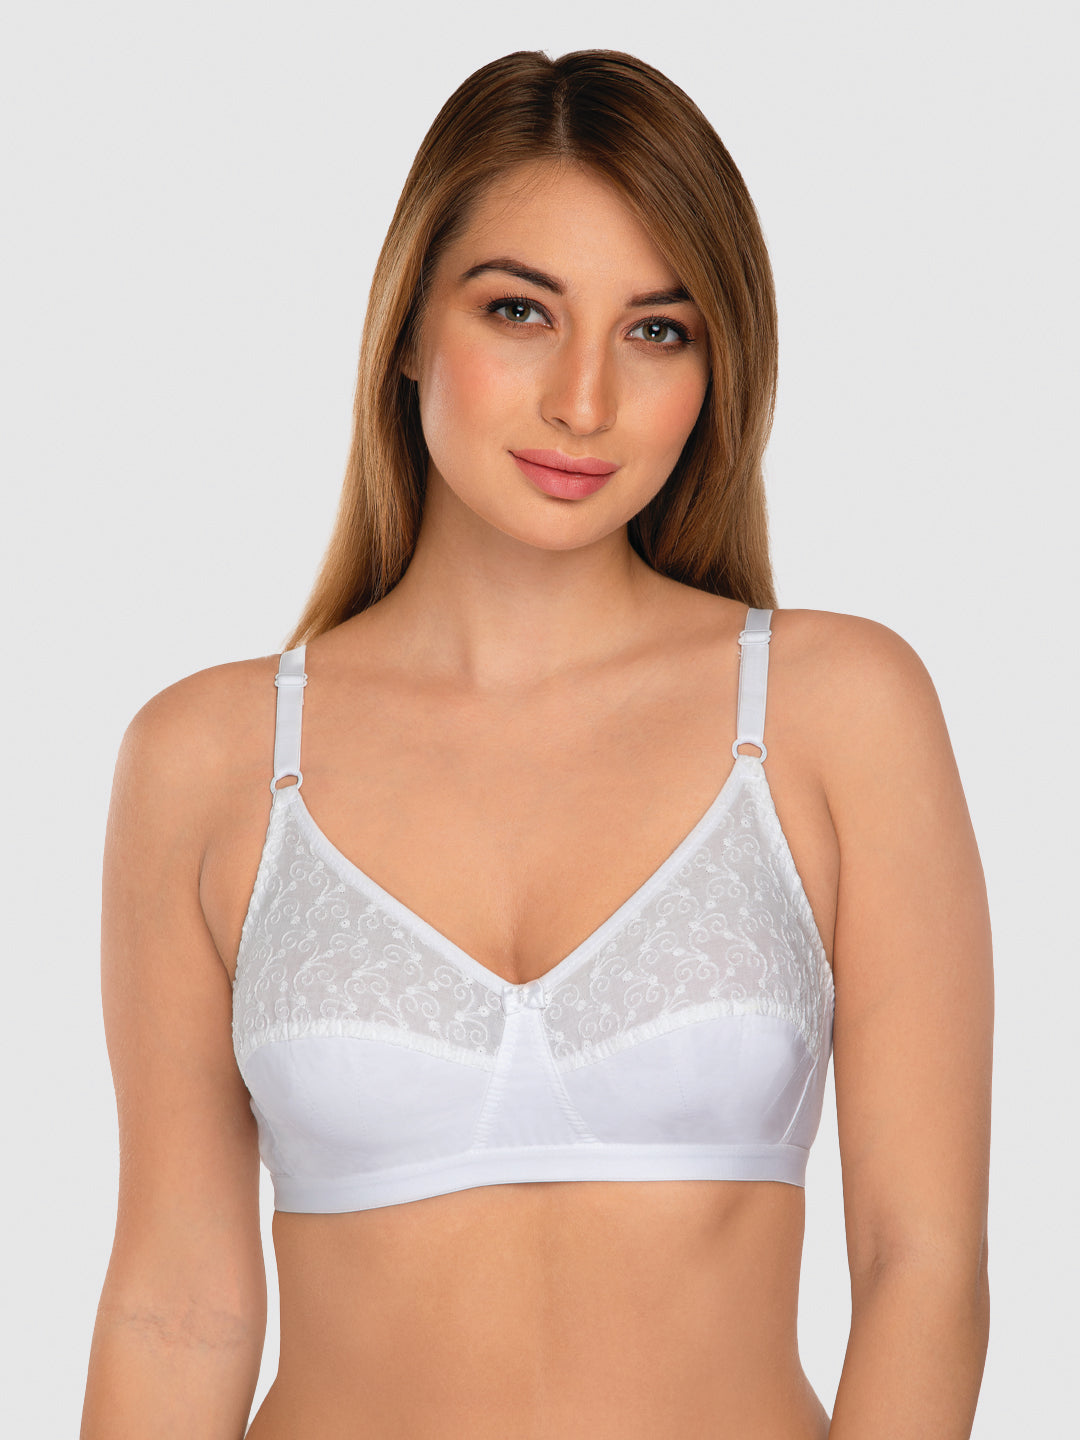 Daisy Dee White Non Padded Non Wired Full Coverage Bra NILIGNCE-White